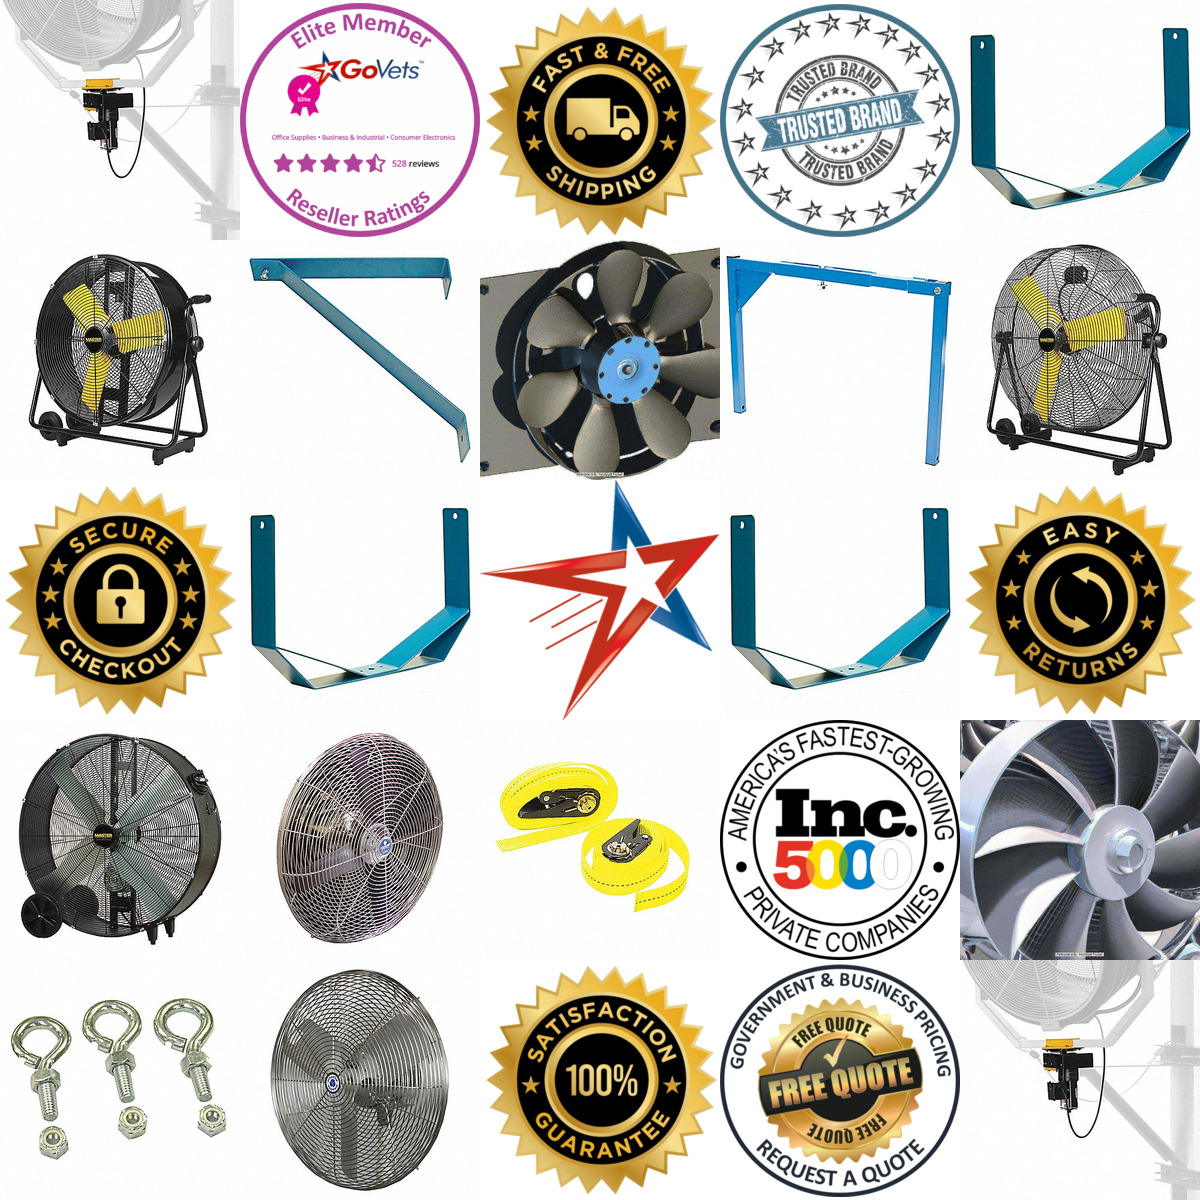 A selection of Industrial Fan Accessories products on GoVets